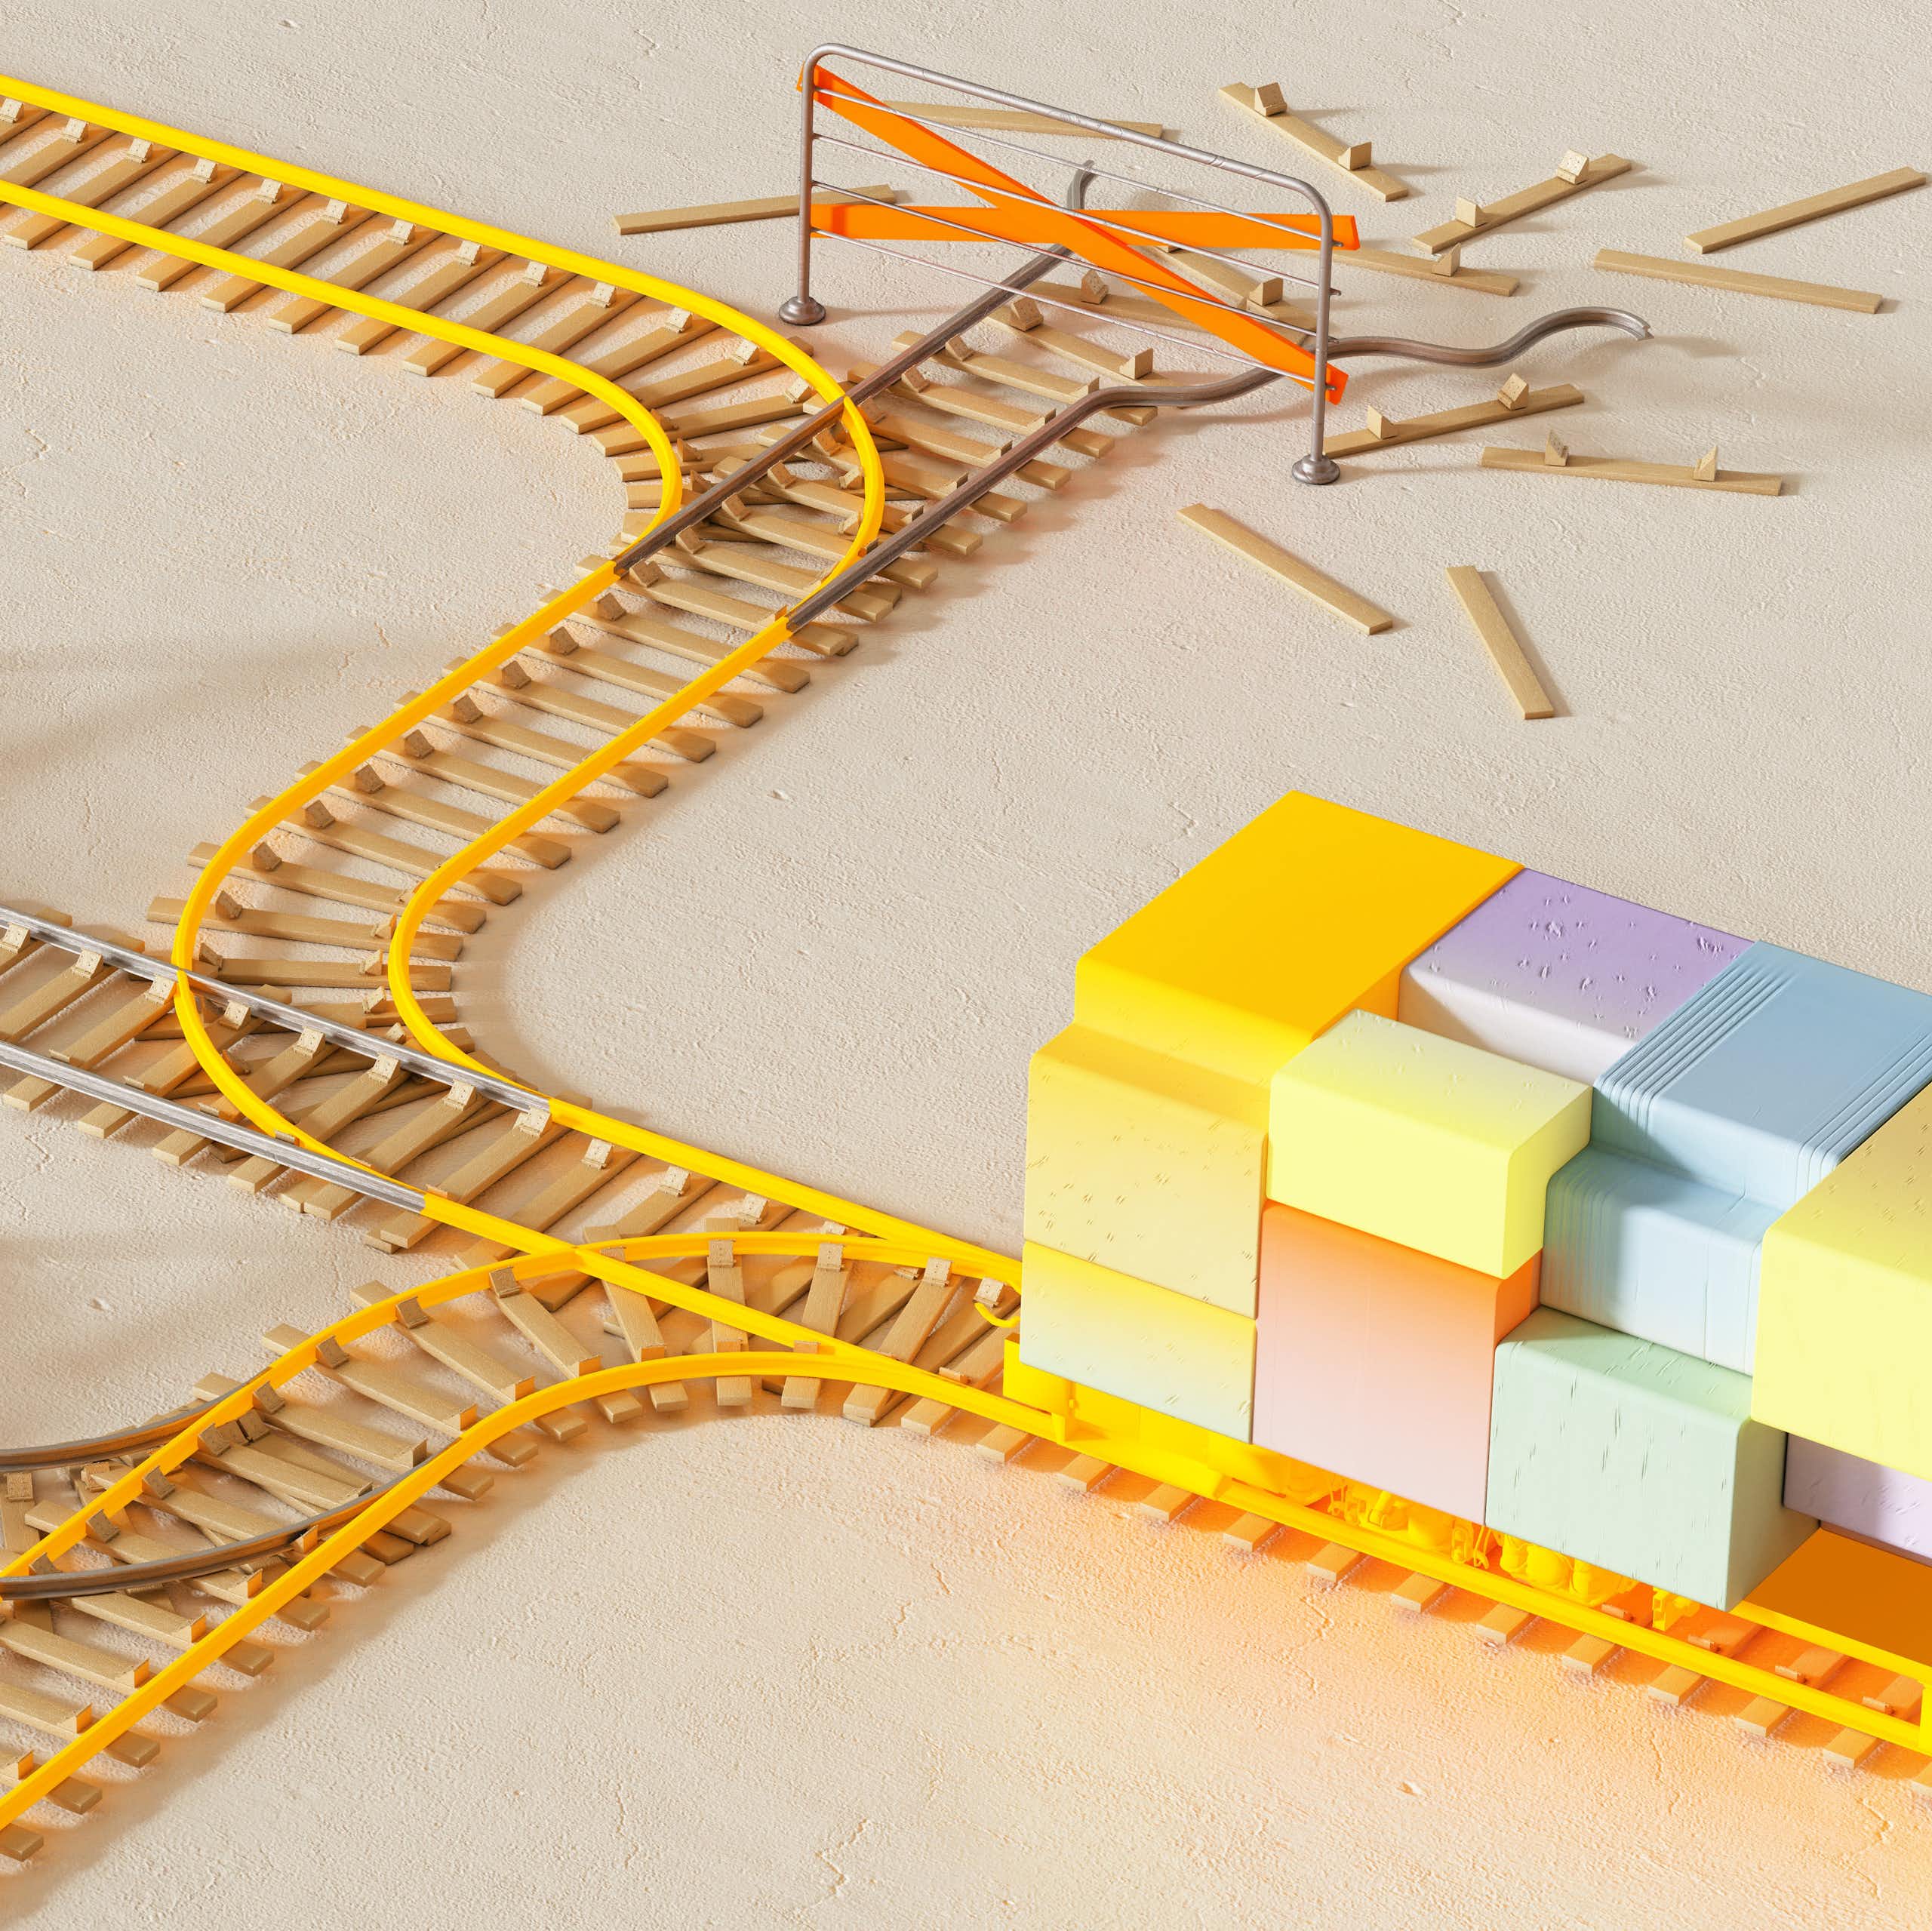 An illustration of blocks in the shape of a train approaching a point with three sets of tracks to choose from.